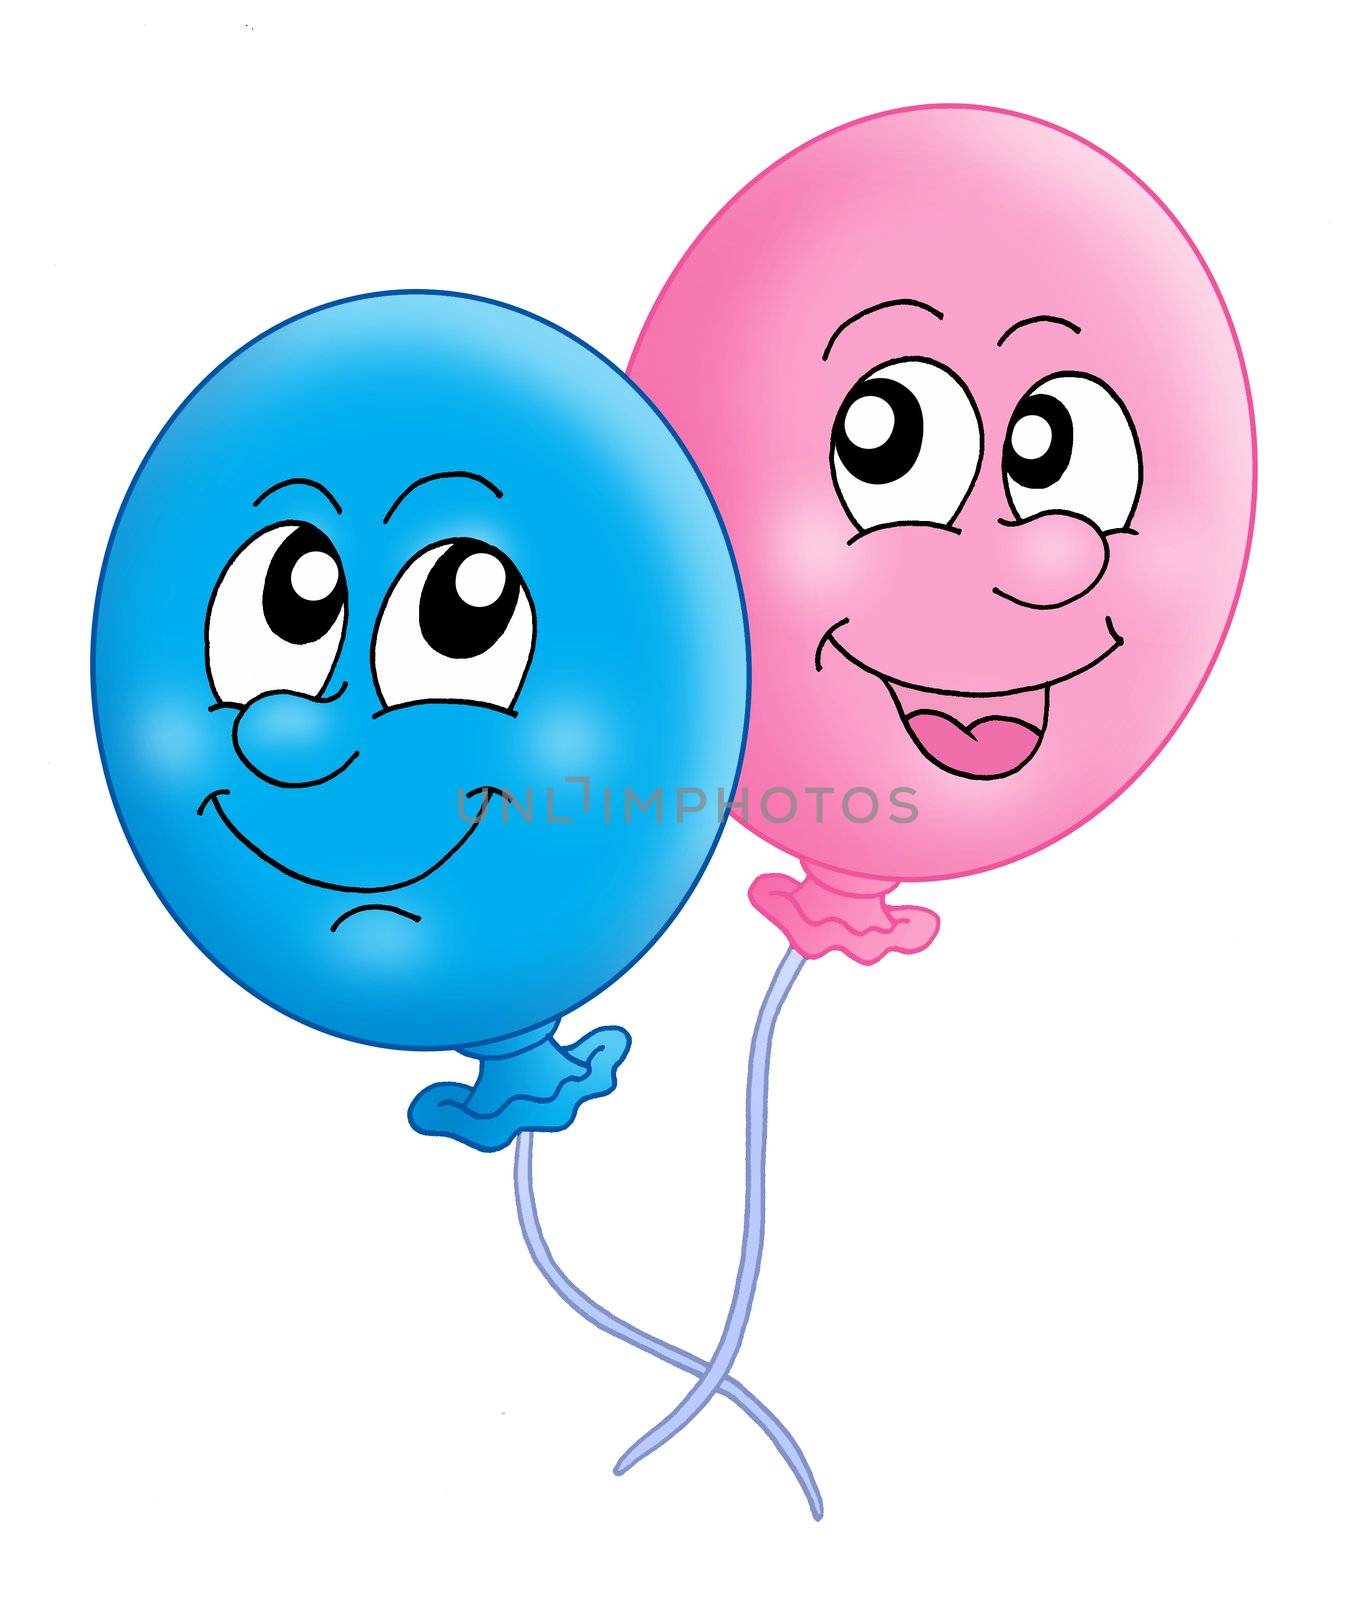 Color illustration of two balloons.